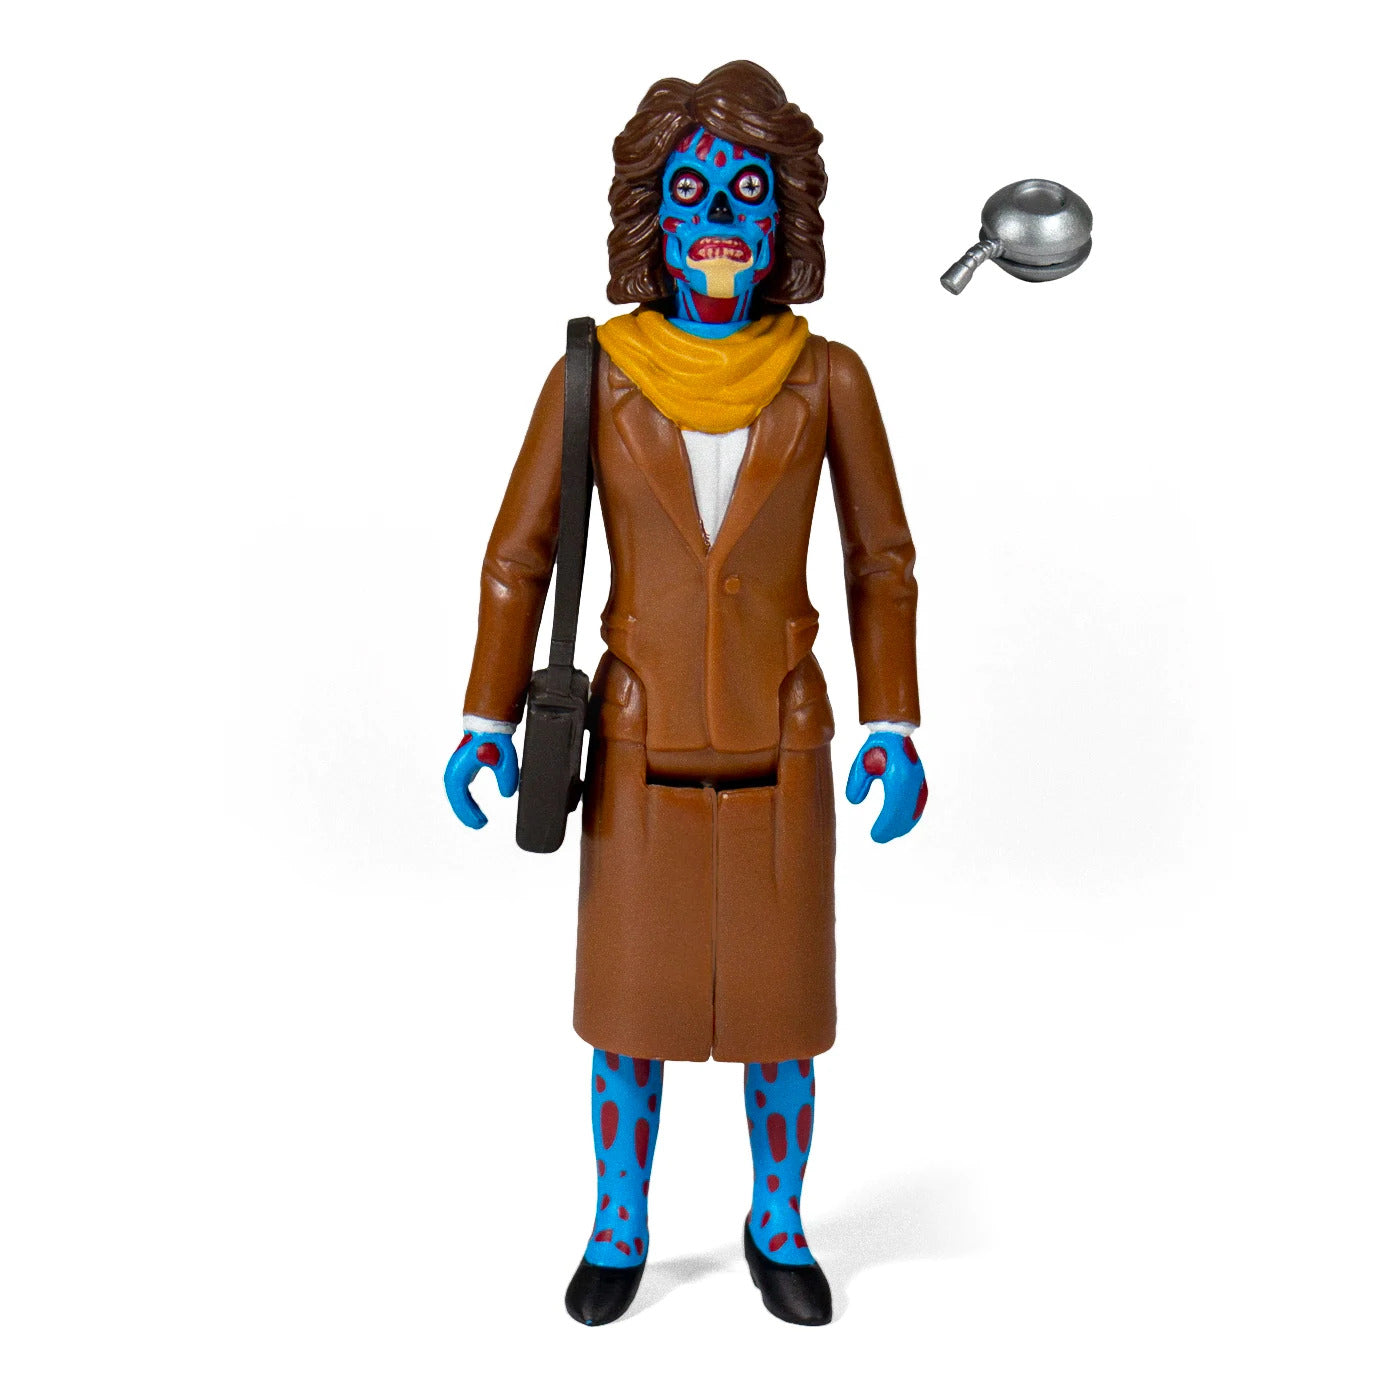 Super7 ReAction Action Figure - They Live - Female Ghoul